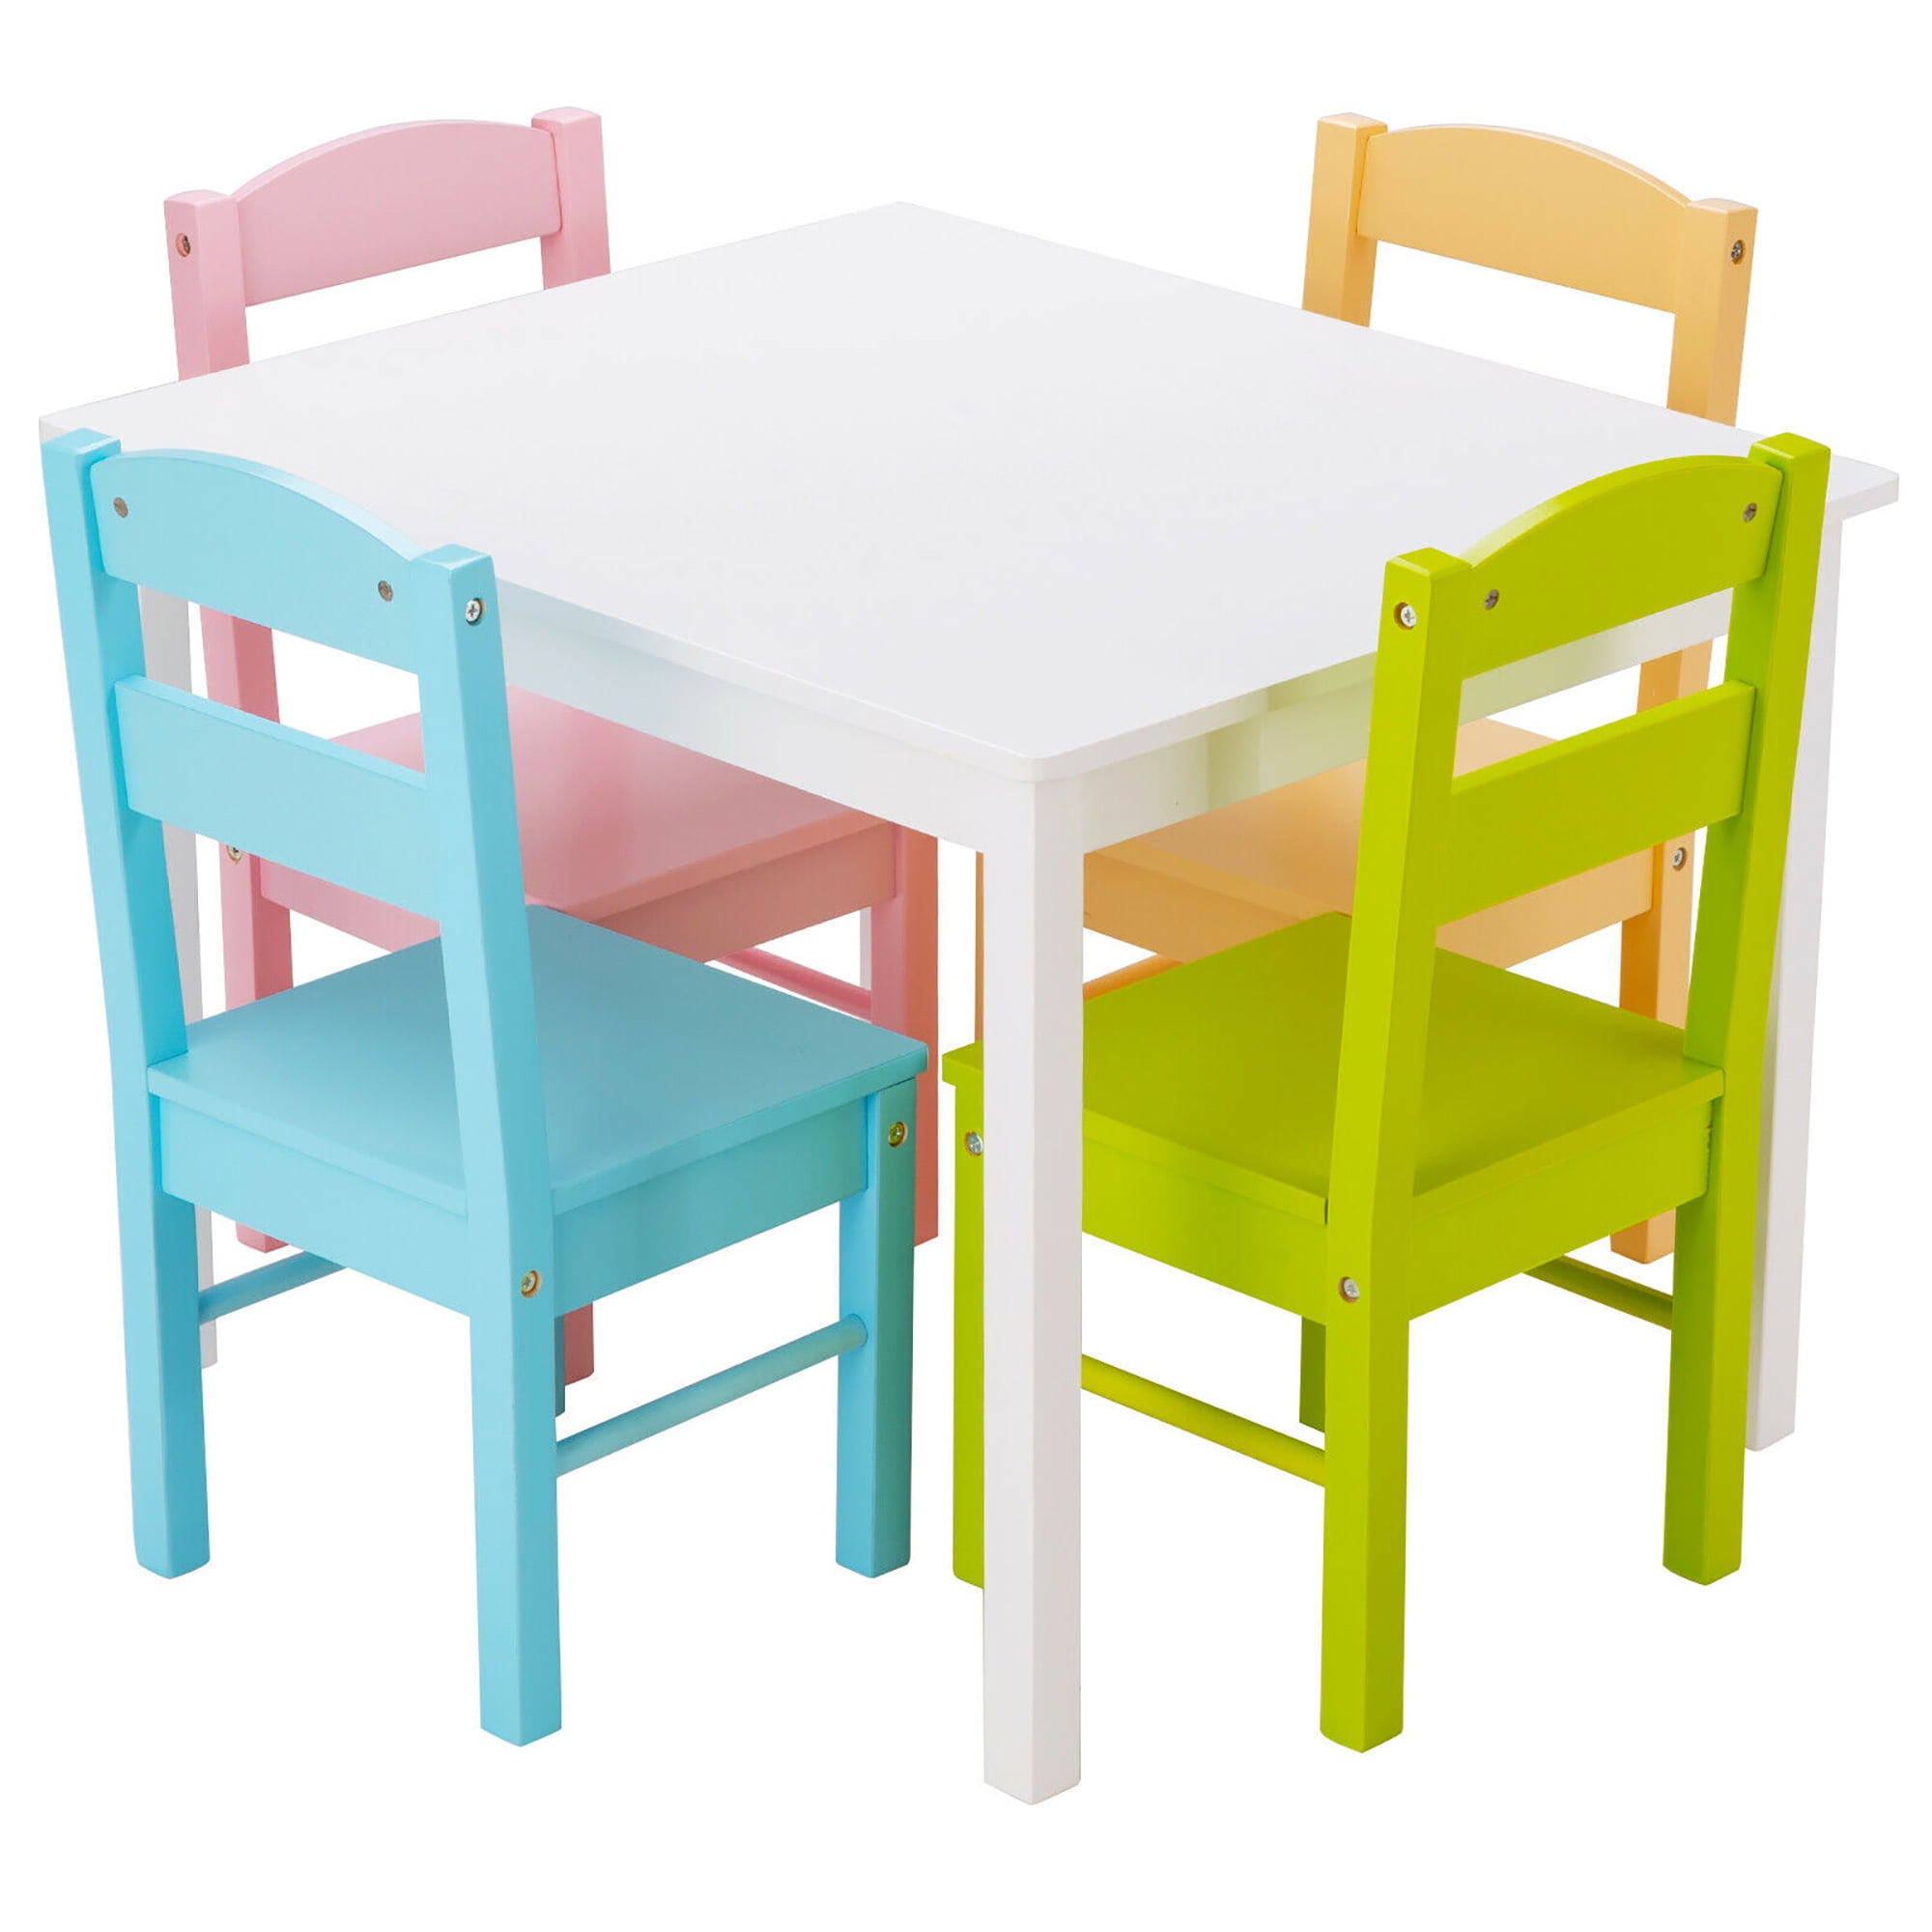 Colorful Appearance Nesee Kids Table and 2 Chairs Set for Boys and Girls（Ship from US） Alphabetic Letter Table Furniture for Toddlers Learn The Letters While Playing Light Blue 